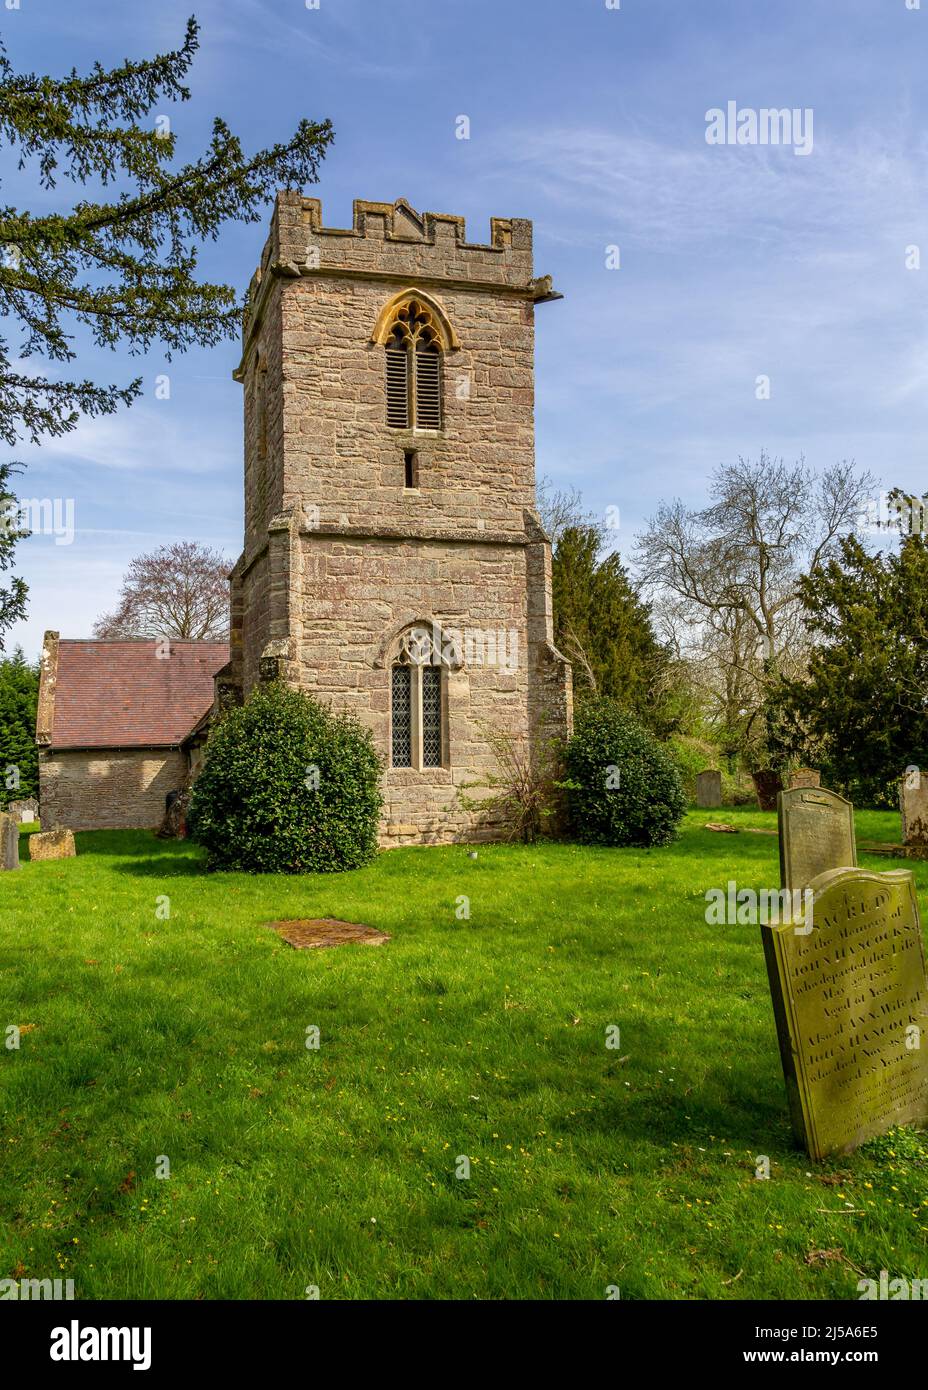 Church of St. Peter in Abbots Morton, Worcestershire, England. Stock Photo